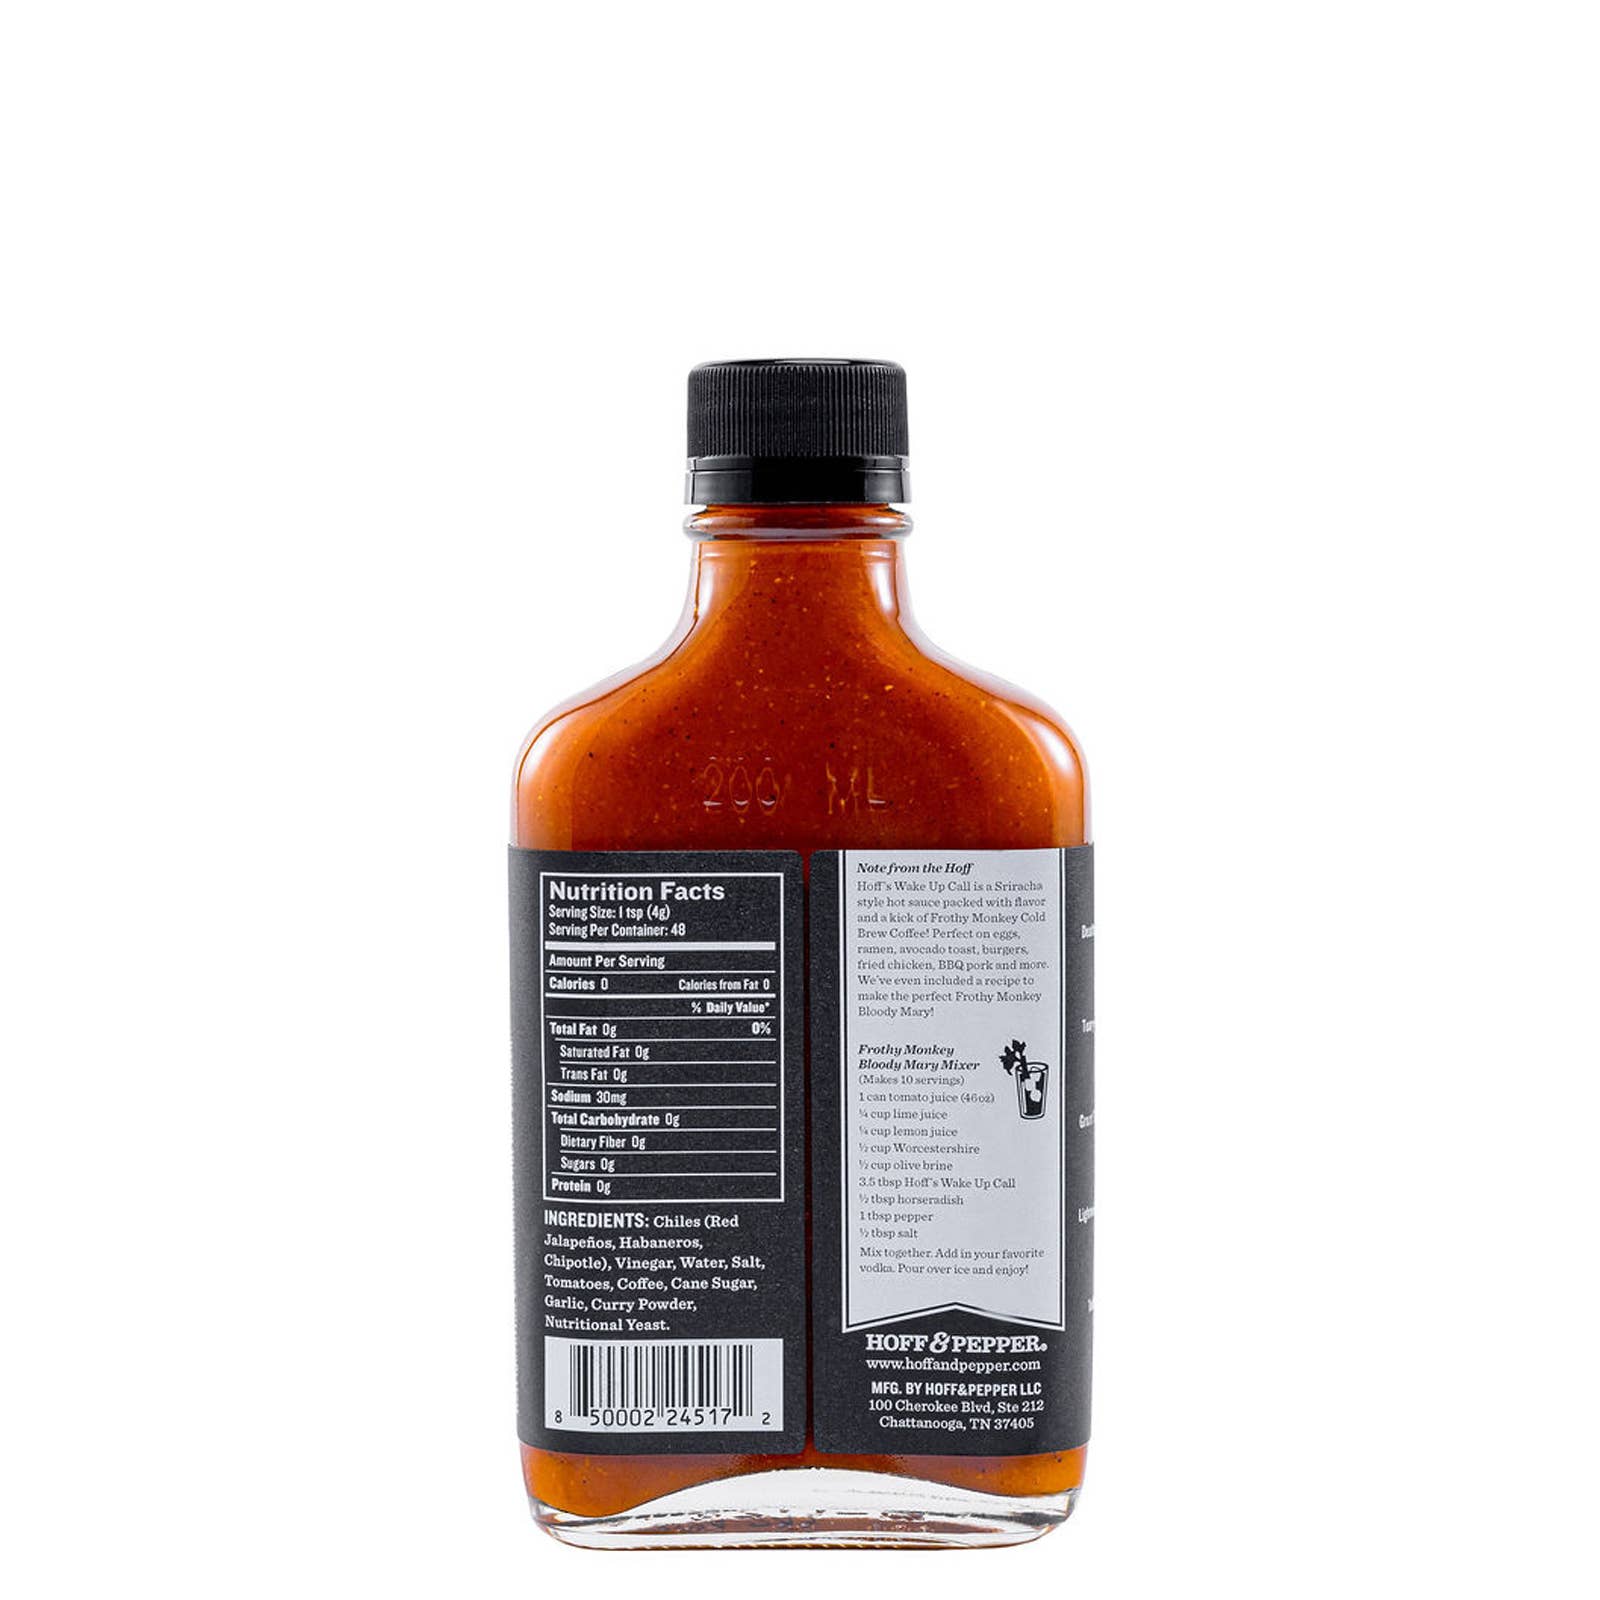 Wake Up Call - Hoff's Cold Brew Coffee Hot Sauce - 6.7oz